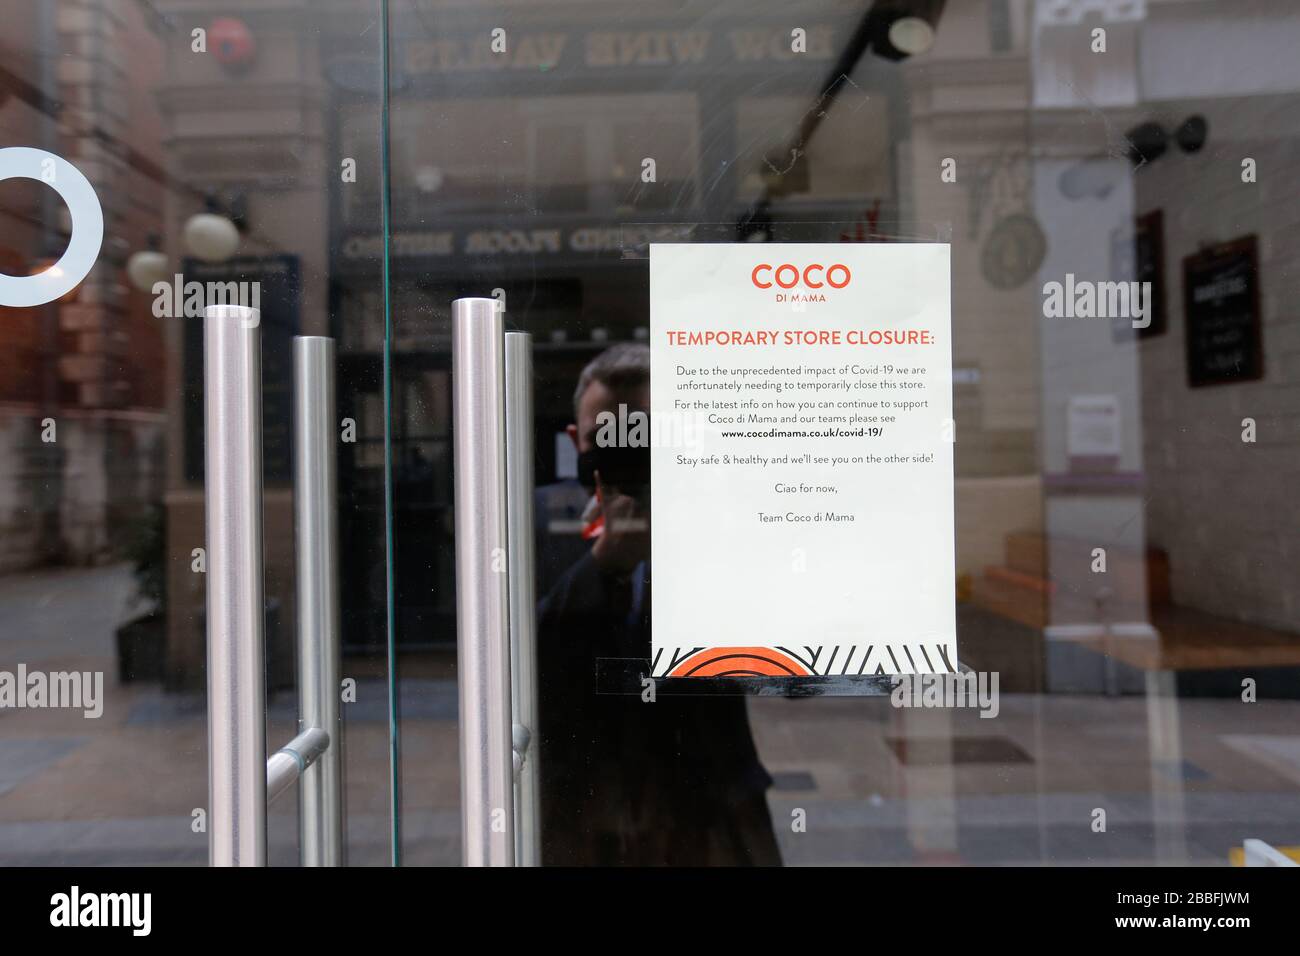 London, UK. 31st March 2020. COVID-19 pandemic closed shops around St.Pauls Cathedral and nearby with streets nearly empty or empty. Credit: AM24/Alamy Live News Stock Photo